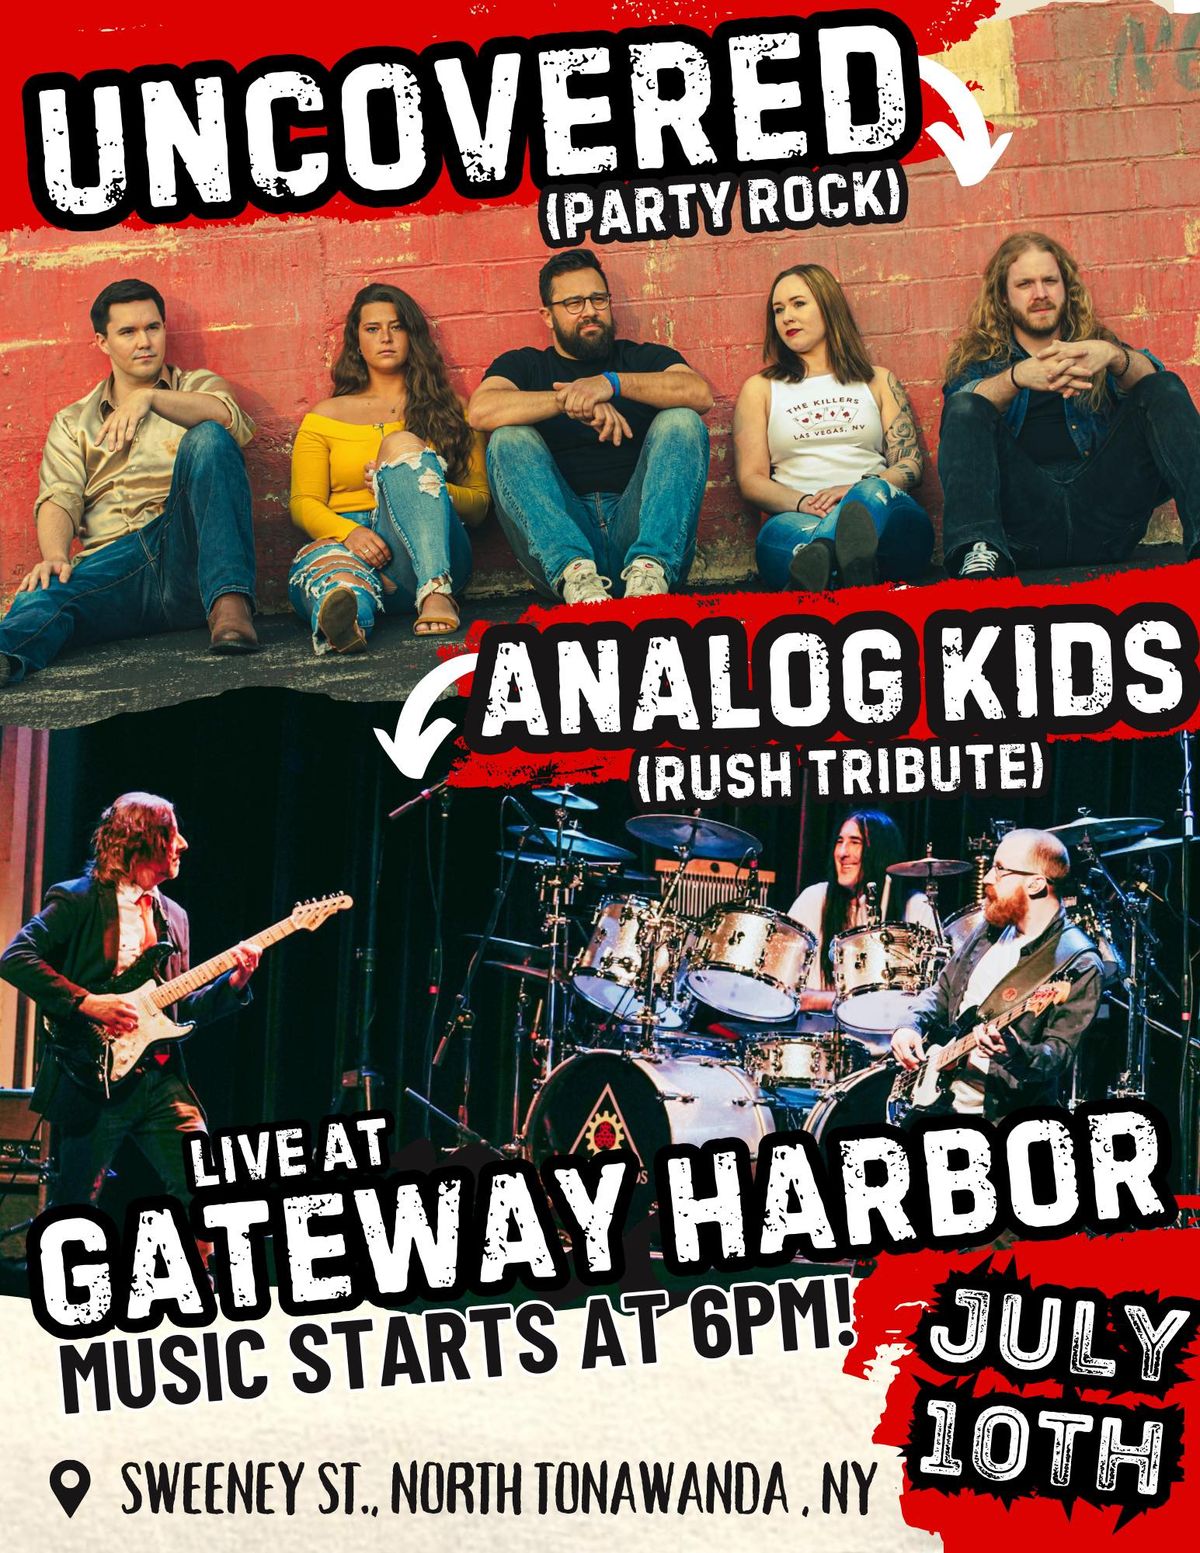 RUSH Tribute Analog Kids Rocks Gateway Harbor with UnCovered (party rock band) FREE Don't Miss This!